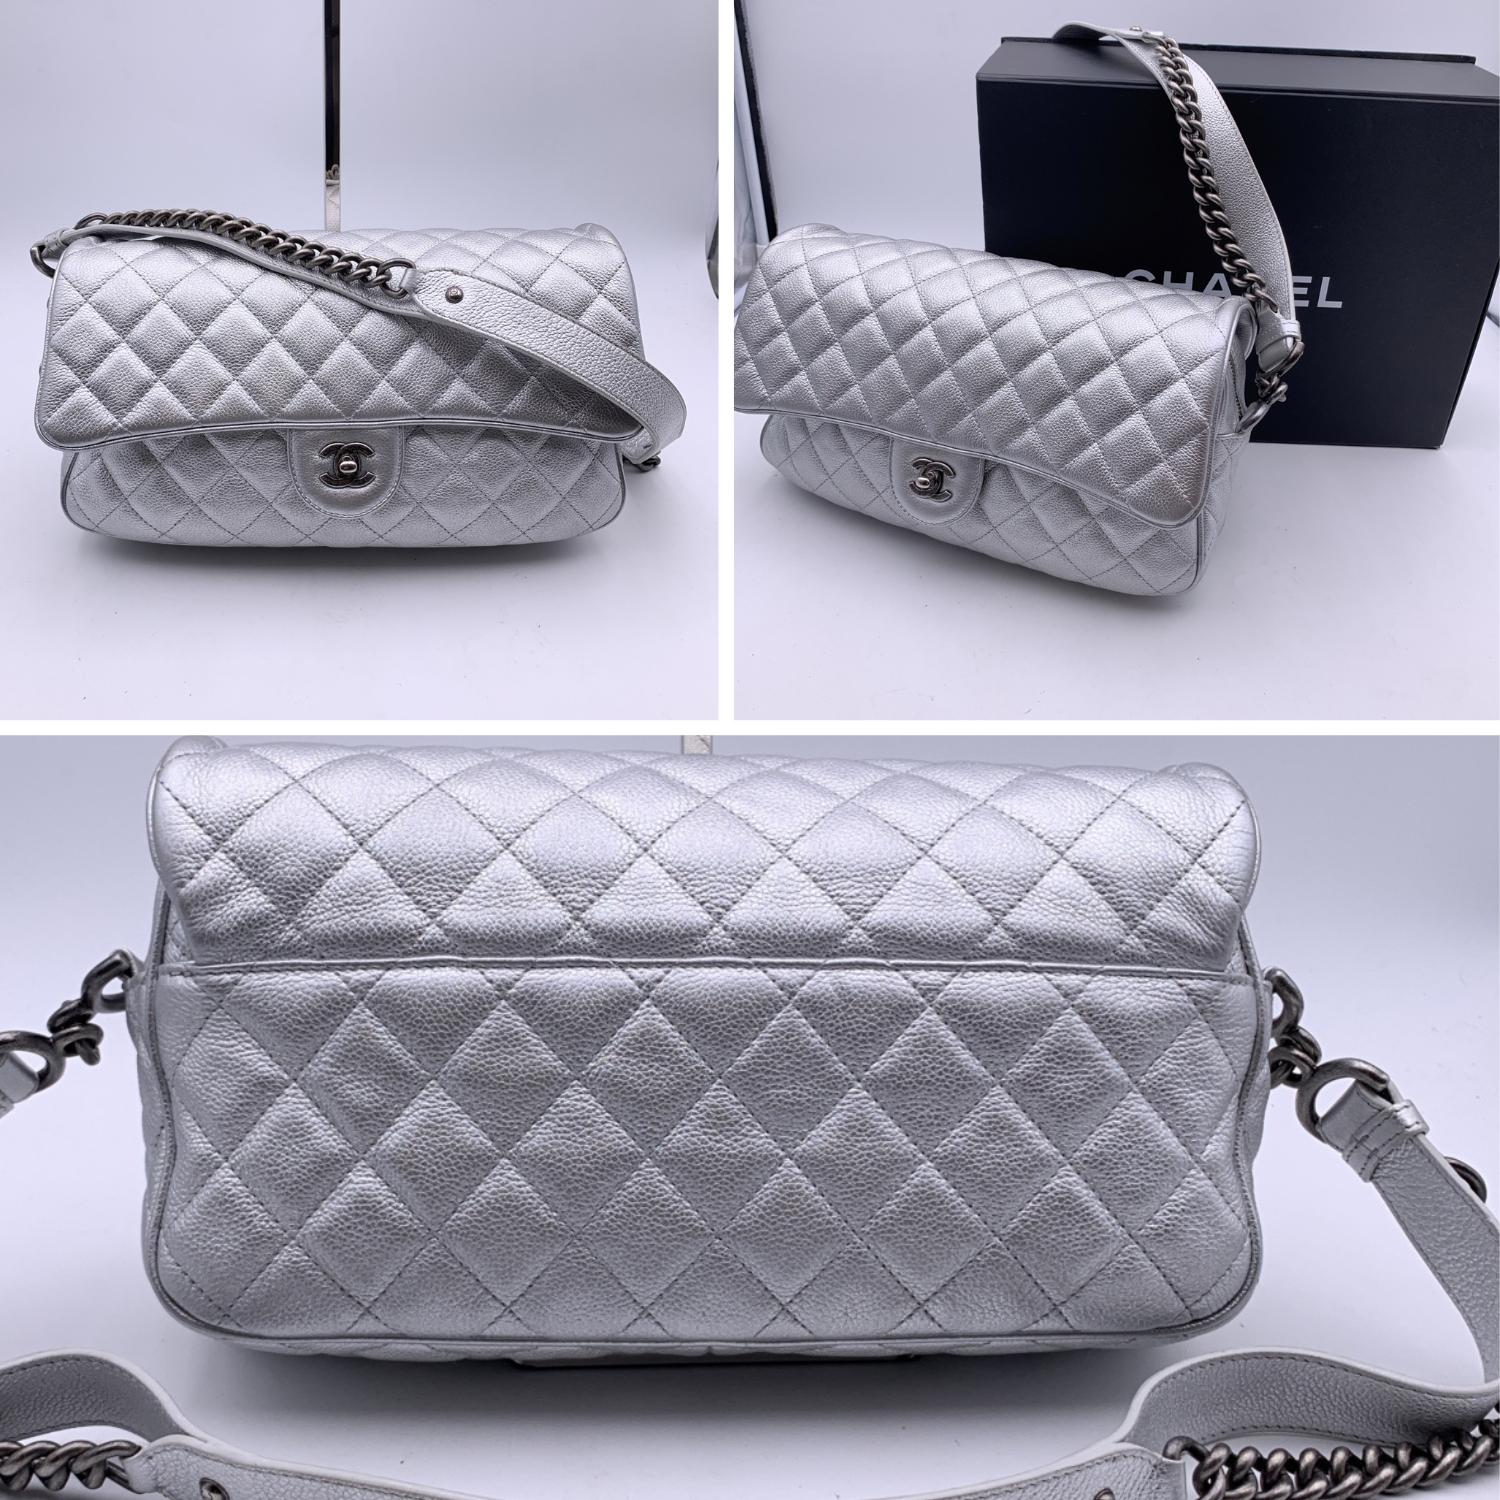 Chanel Airline 2016 Silver Metal Quilted Leather Easy Flap Shoulder Bag 1